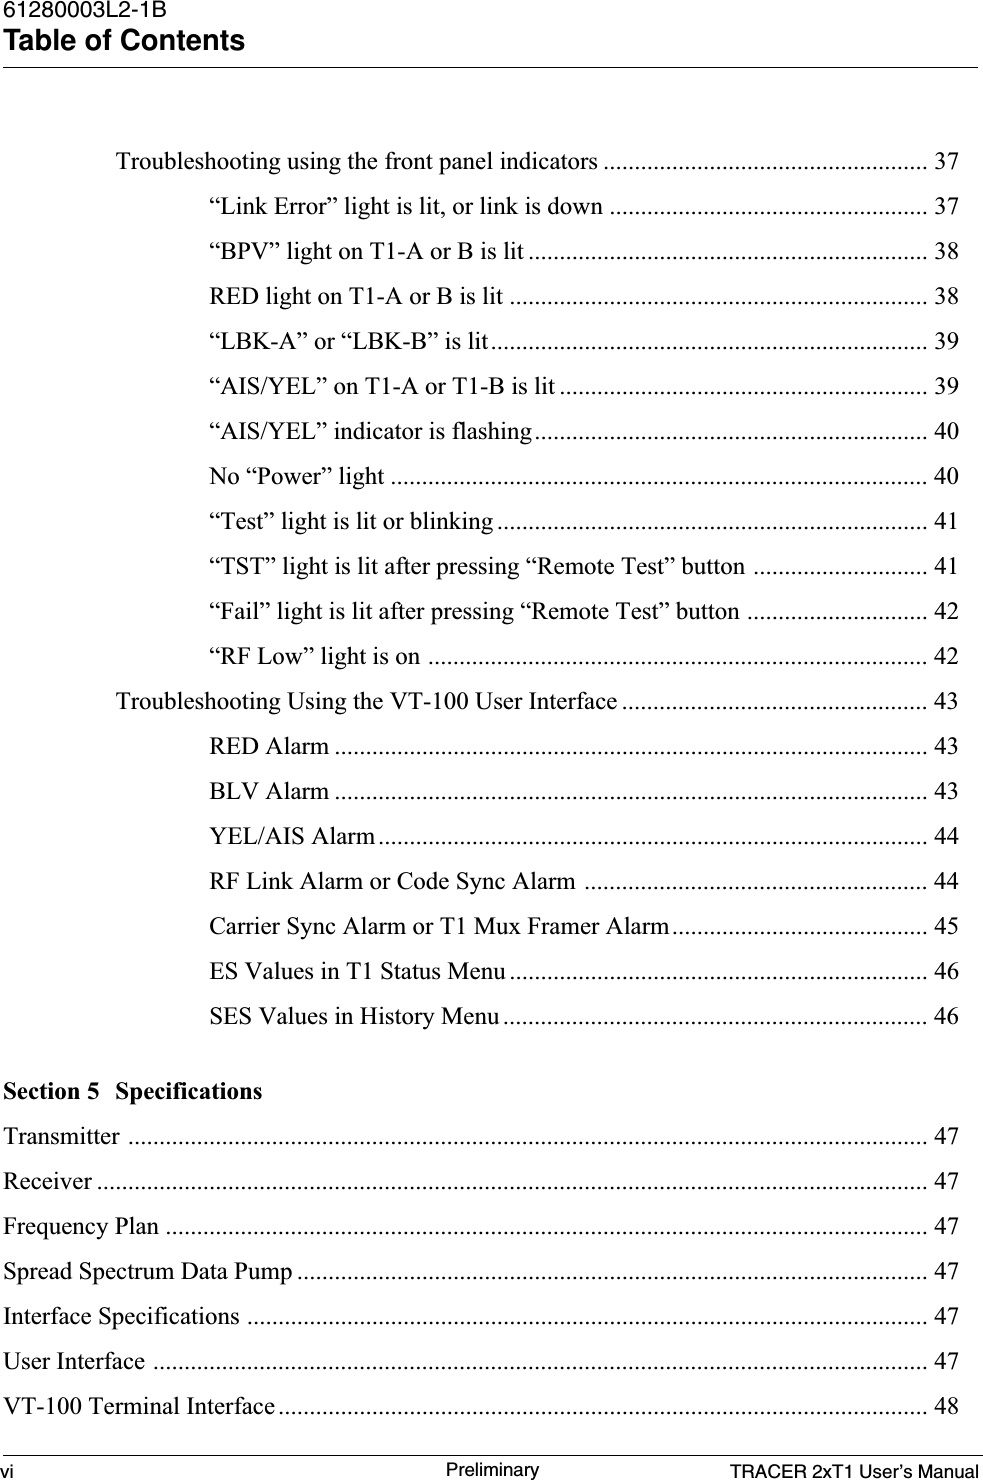 TRACER 2xT1 User’s Manual61280003L2-1BTable of Contentsvi PreliminaryTroubleshooting using the front panel indicators .................................................... 37“Link Error” light is lit, or link is down ................................................... 37“BPV” light on T1-A or B is lit ................................................................ 38RED light on T1-A or B is lit ................................................................... 38“LBK-A” or “LBK-B” is lit...................................................................... 39“AIS/YEL” on T1-A or T1-B is lit ........................................................... 39“AIS/YEL” indicator is flashing............................................................... 40No “Power” light ...................................................................................... 40“Test” light is lit or blinking ..................................................................... 41“TST” light is lit after pressing “Remote Test” button ............................ 41“Fail” light is lit after pressing “Remote Test” button ............................. 42“RF Low” light is on ................................................................................ 42Troubleshooting Using the VT-100 User Interface ................................................. 43RED Alarm ............................................................................................... 43BLV Alarm ............................................................................................... 43YEL/AIS Alarm........................................................................................ 44RF Link Alarm or Code Sync Alarm ....................................................... 44Carrier Sync Alarm or T1 Mux Framer Alarm......................................... 45ES Values in T1 Status Menu ................................................................... 46SES Values in History Menu .................................................................... 46Section 5 SpecificationsTransmitter ................................................................................................................................ 47Receiver ..................................................................................................................................... 47Frequency Plan .......................................................................................................................... 47Spread Spectrum Data Pump ..................................................................................................... 47Interface Specifications ............................................................................................................. 47User Interface ............................................................................................................................ 47VT-100 Terminal Interface ........................................................................................................ 48